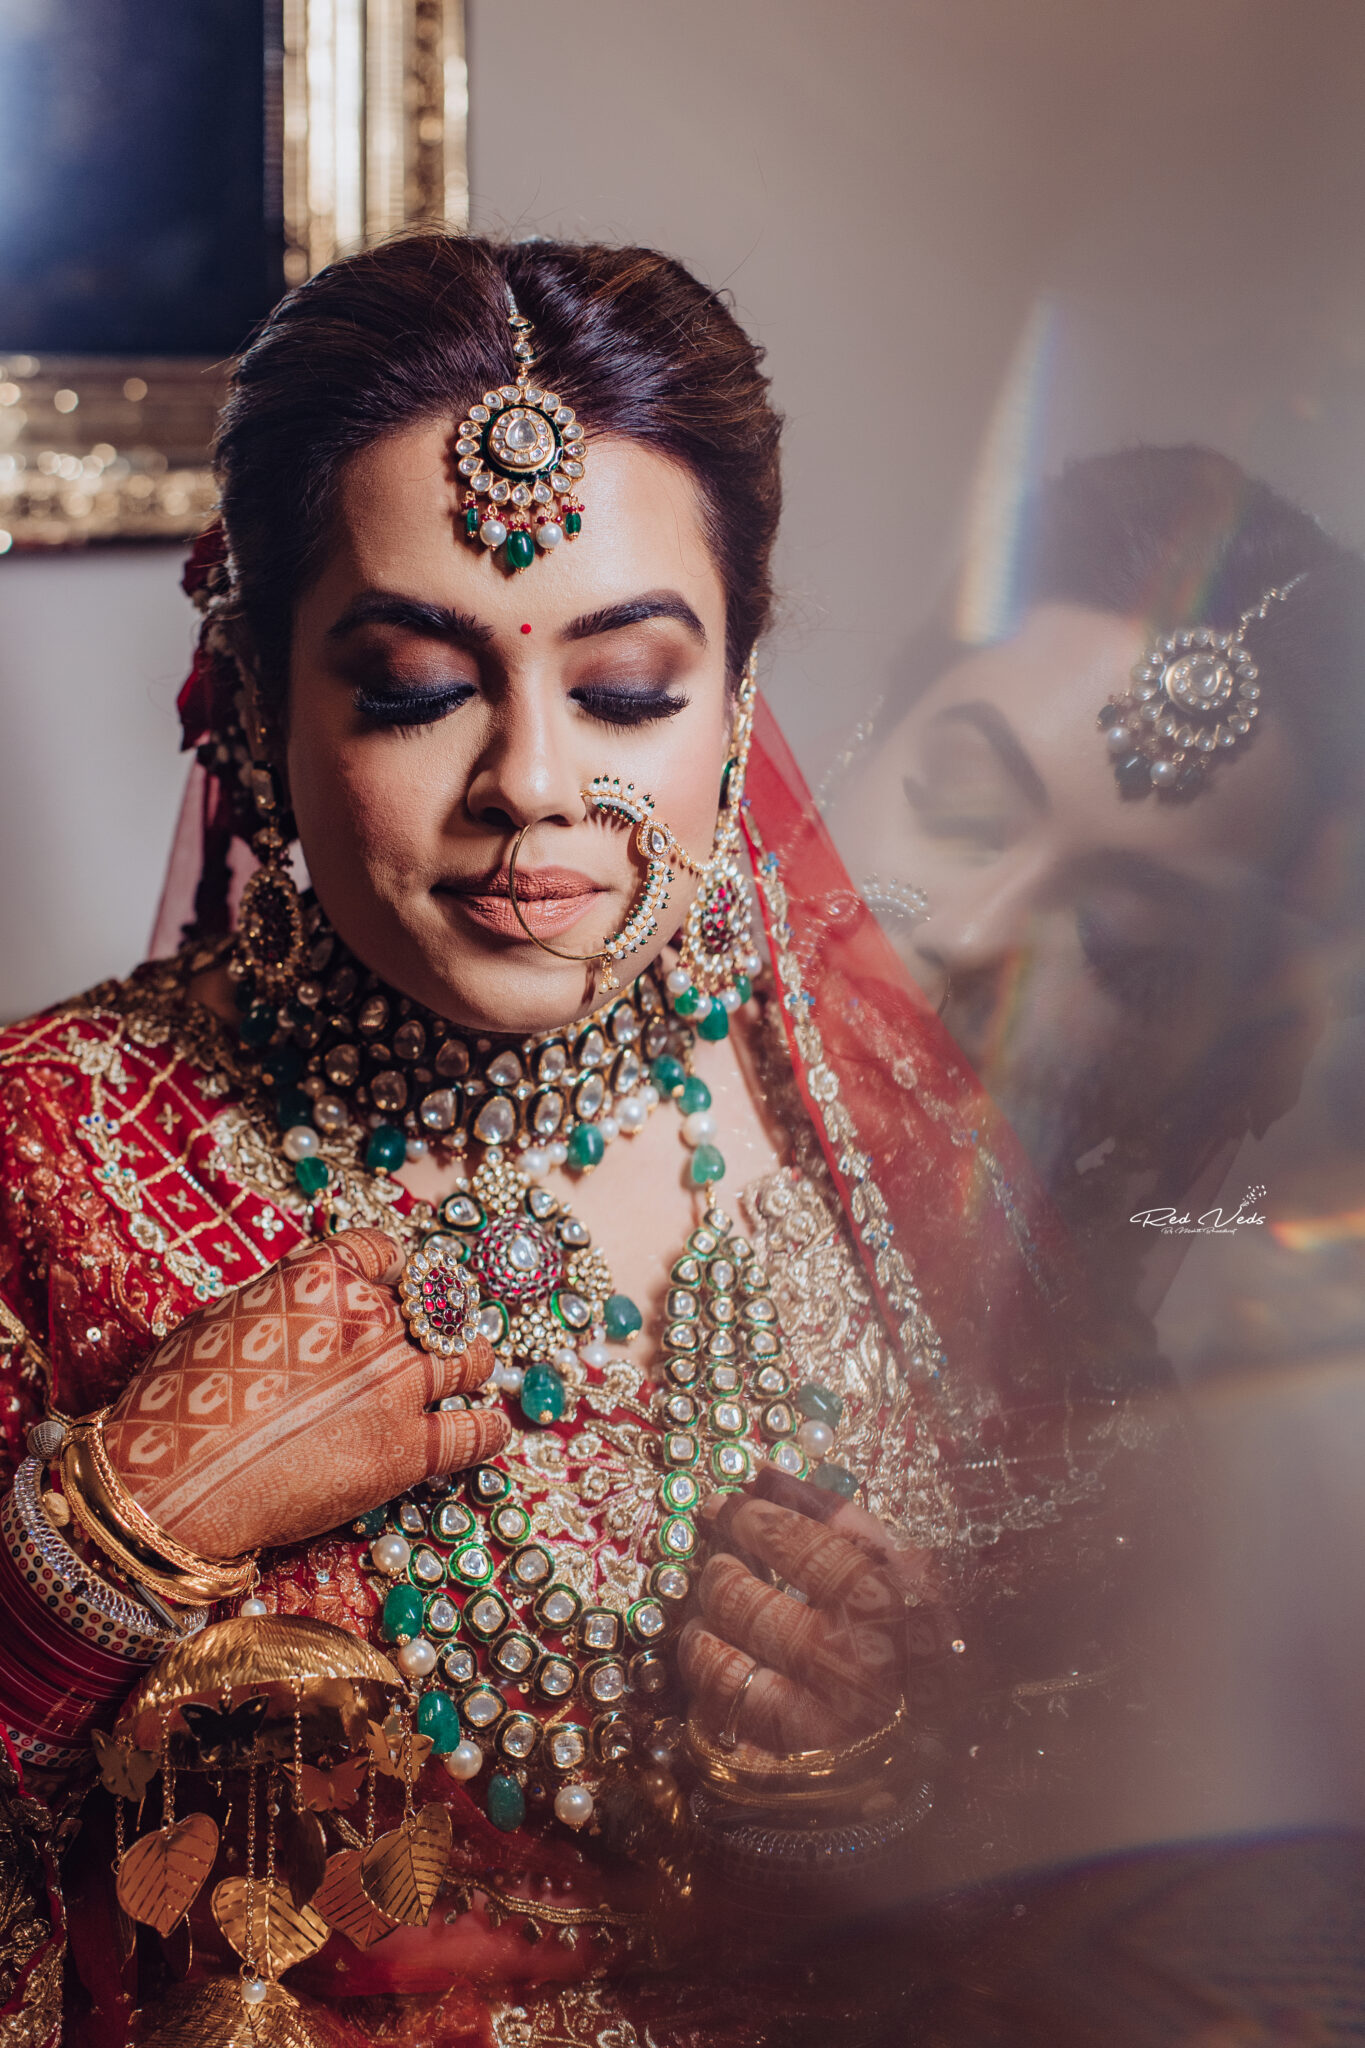 Bollywood Studio : Most Popular Poses for a Bridal Portrait Photo shoot